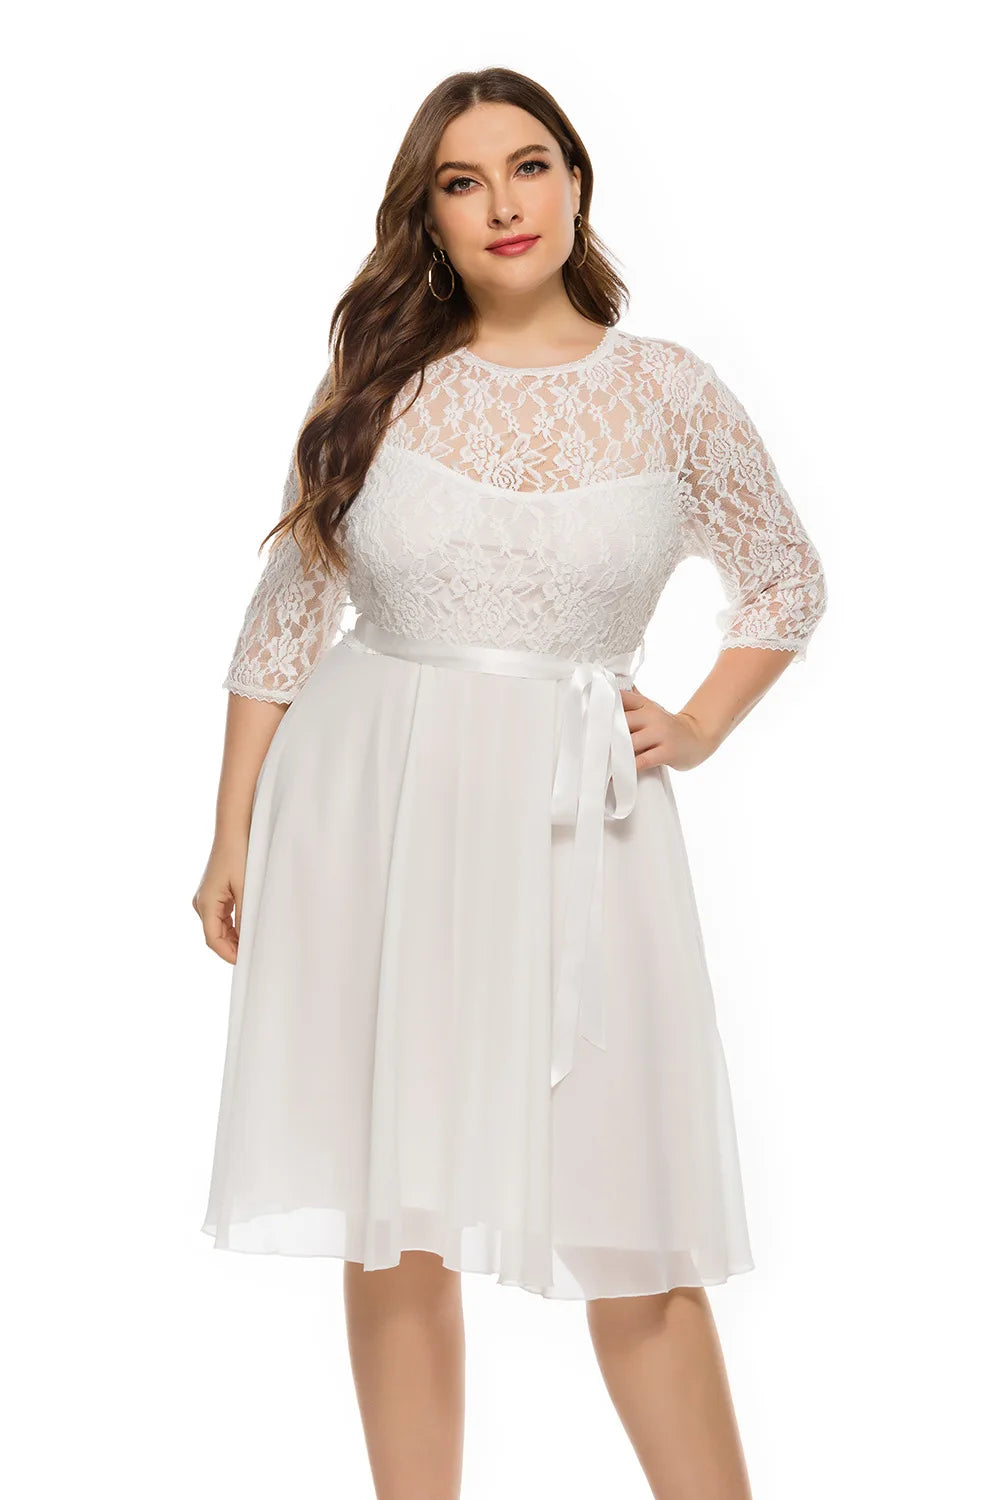 Plus Size Fashional Lace Chiffon Party Evening Formal Dresses For Women